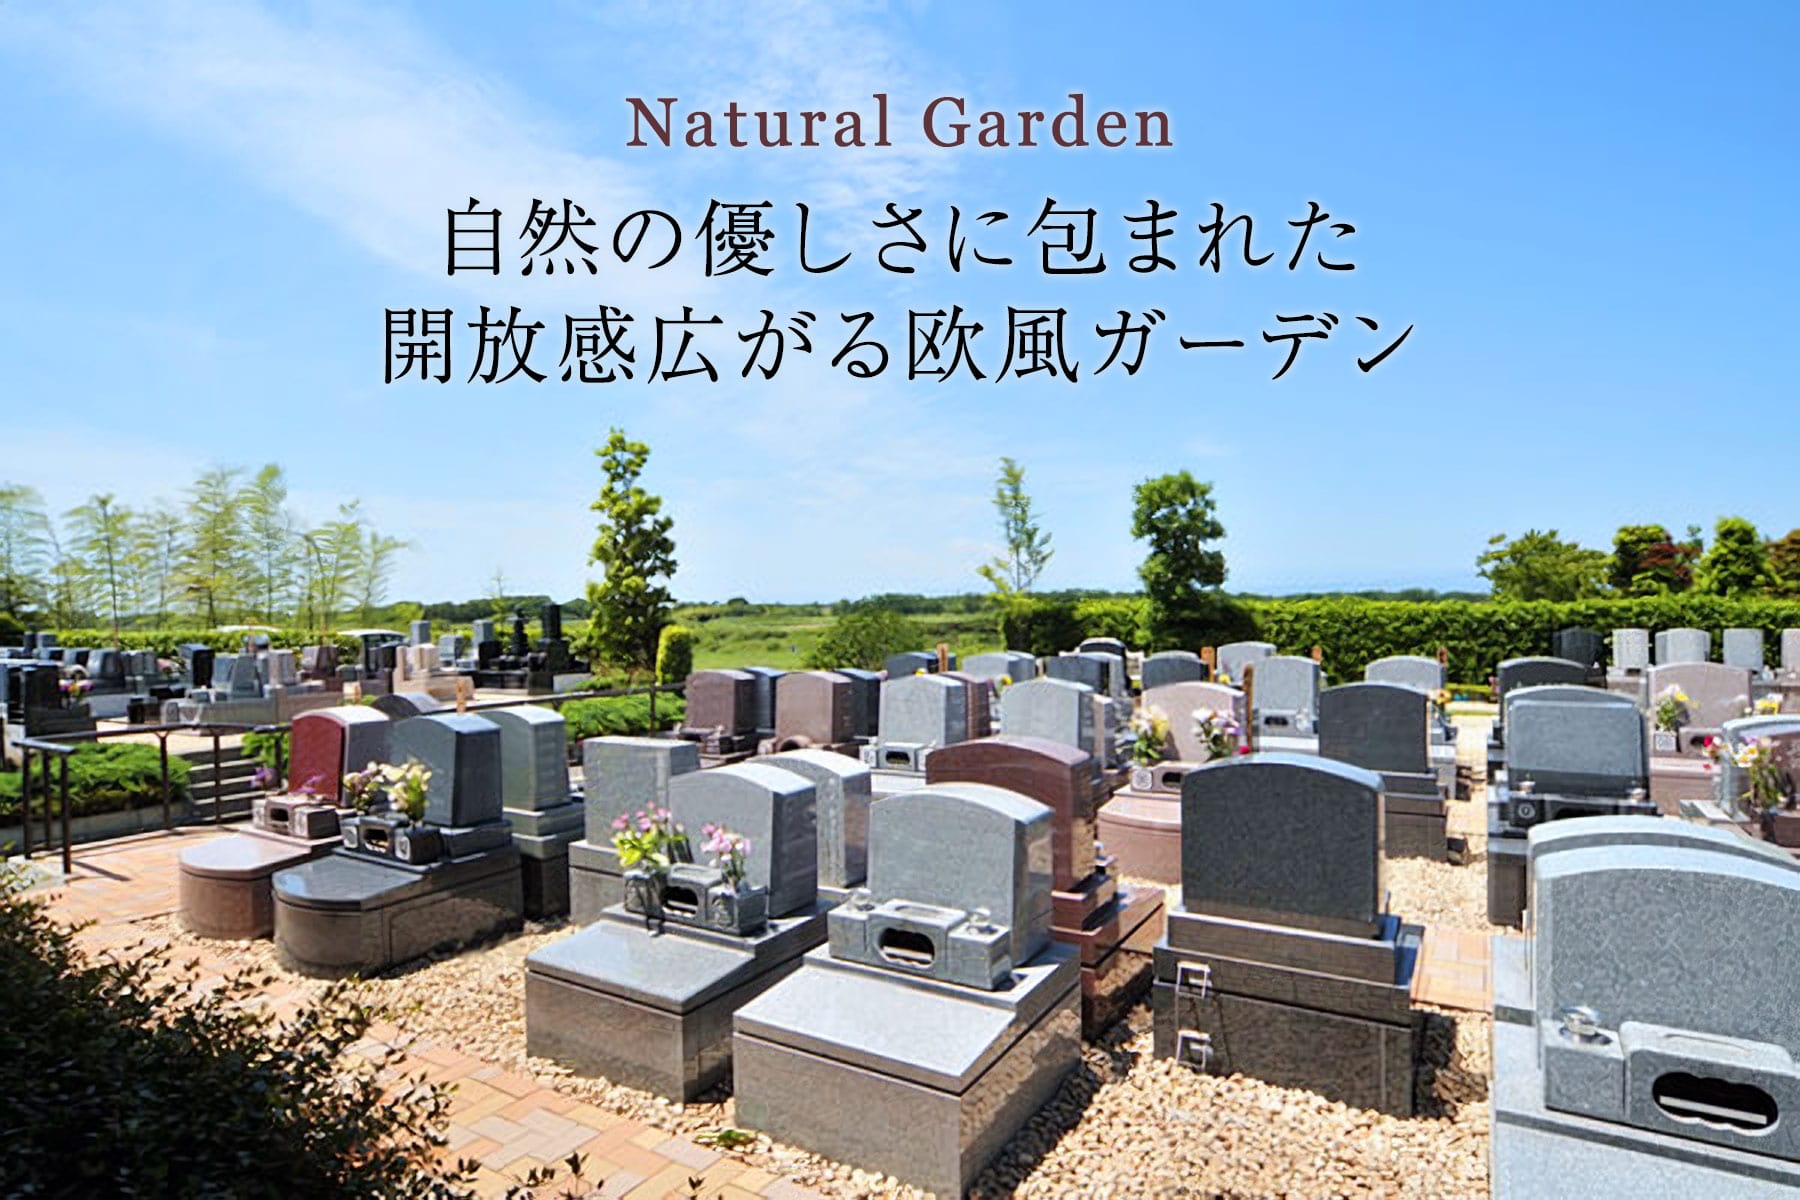 Natural Garden 自然の優しさに包まれた開放感広がる欧風ガーデン